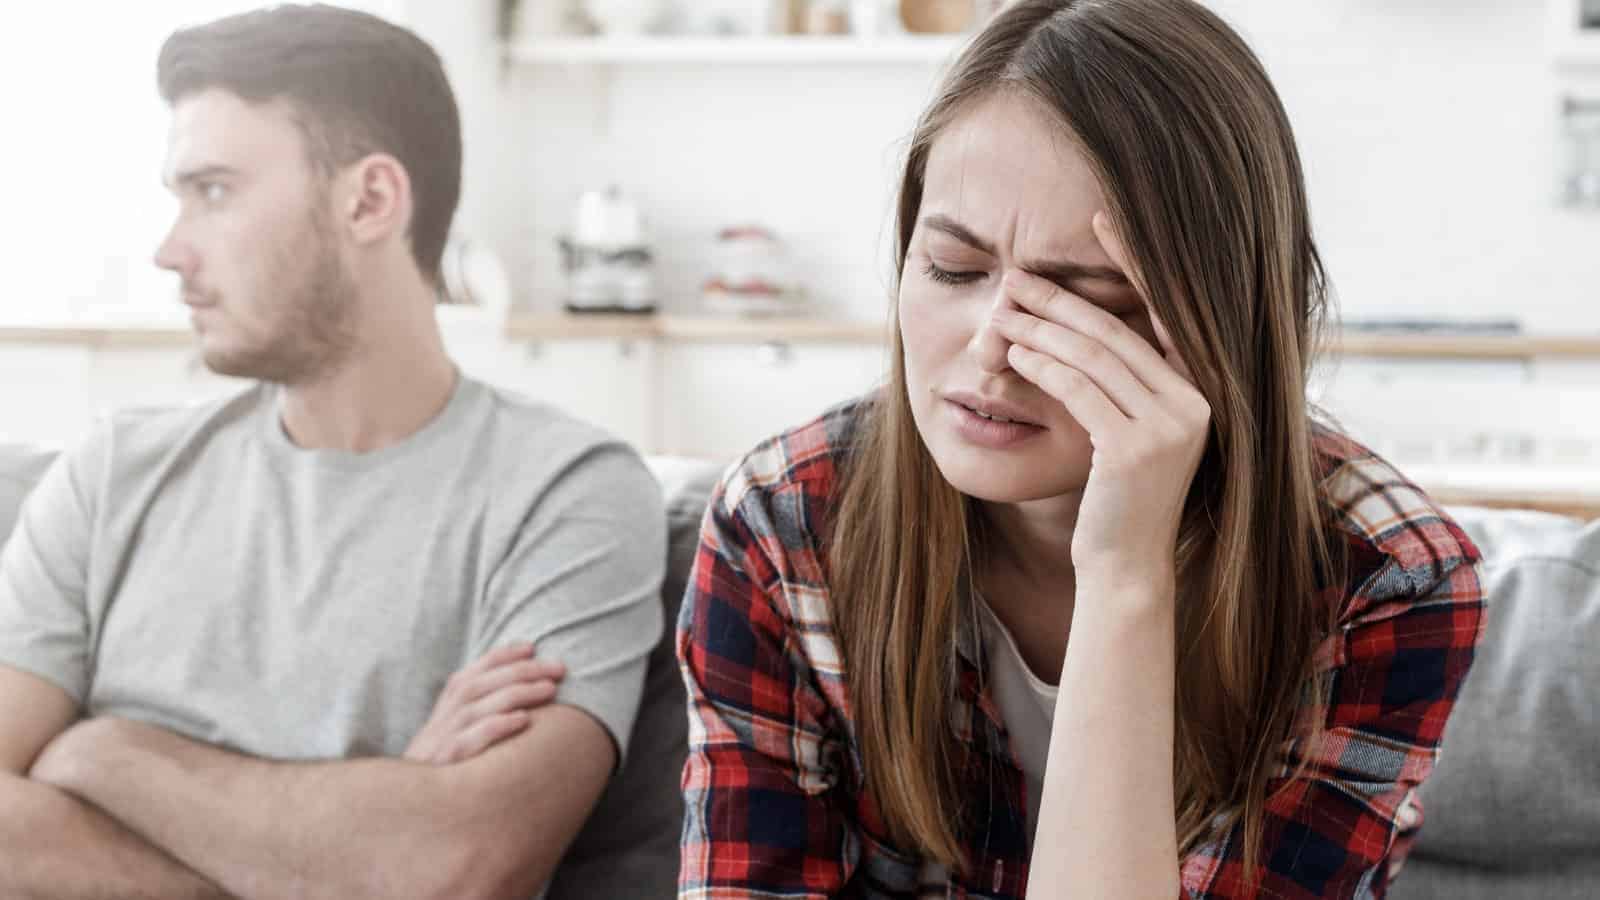 Is Your Partner Manipulative of Your Emotions? Here’s How To Move On